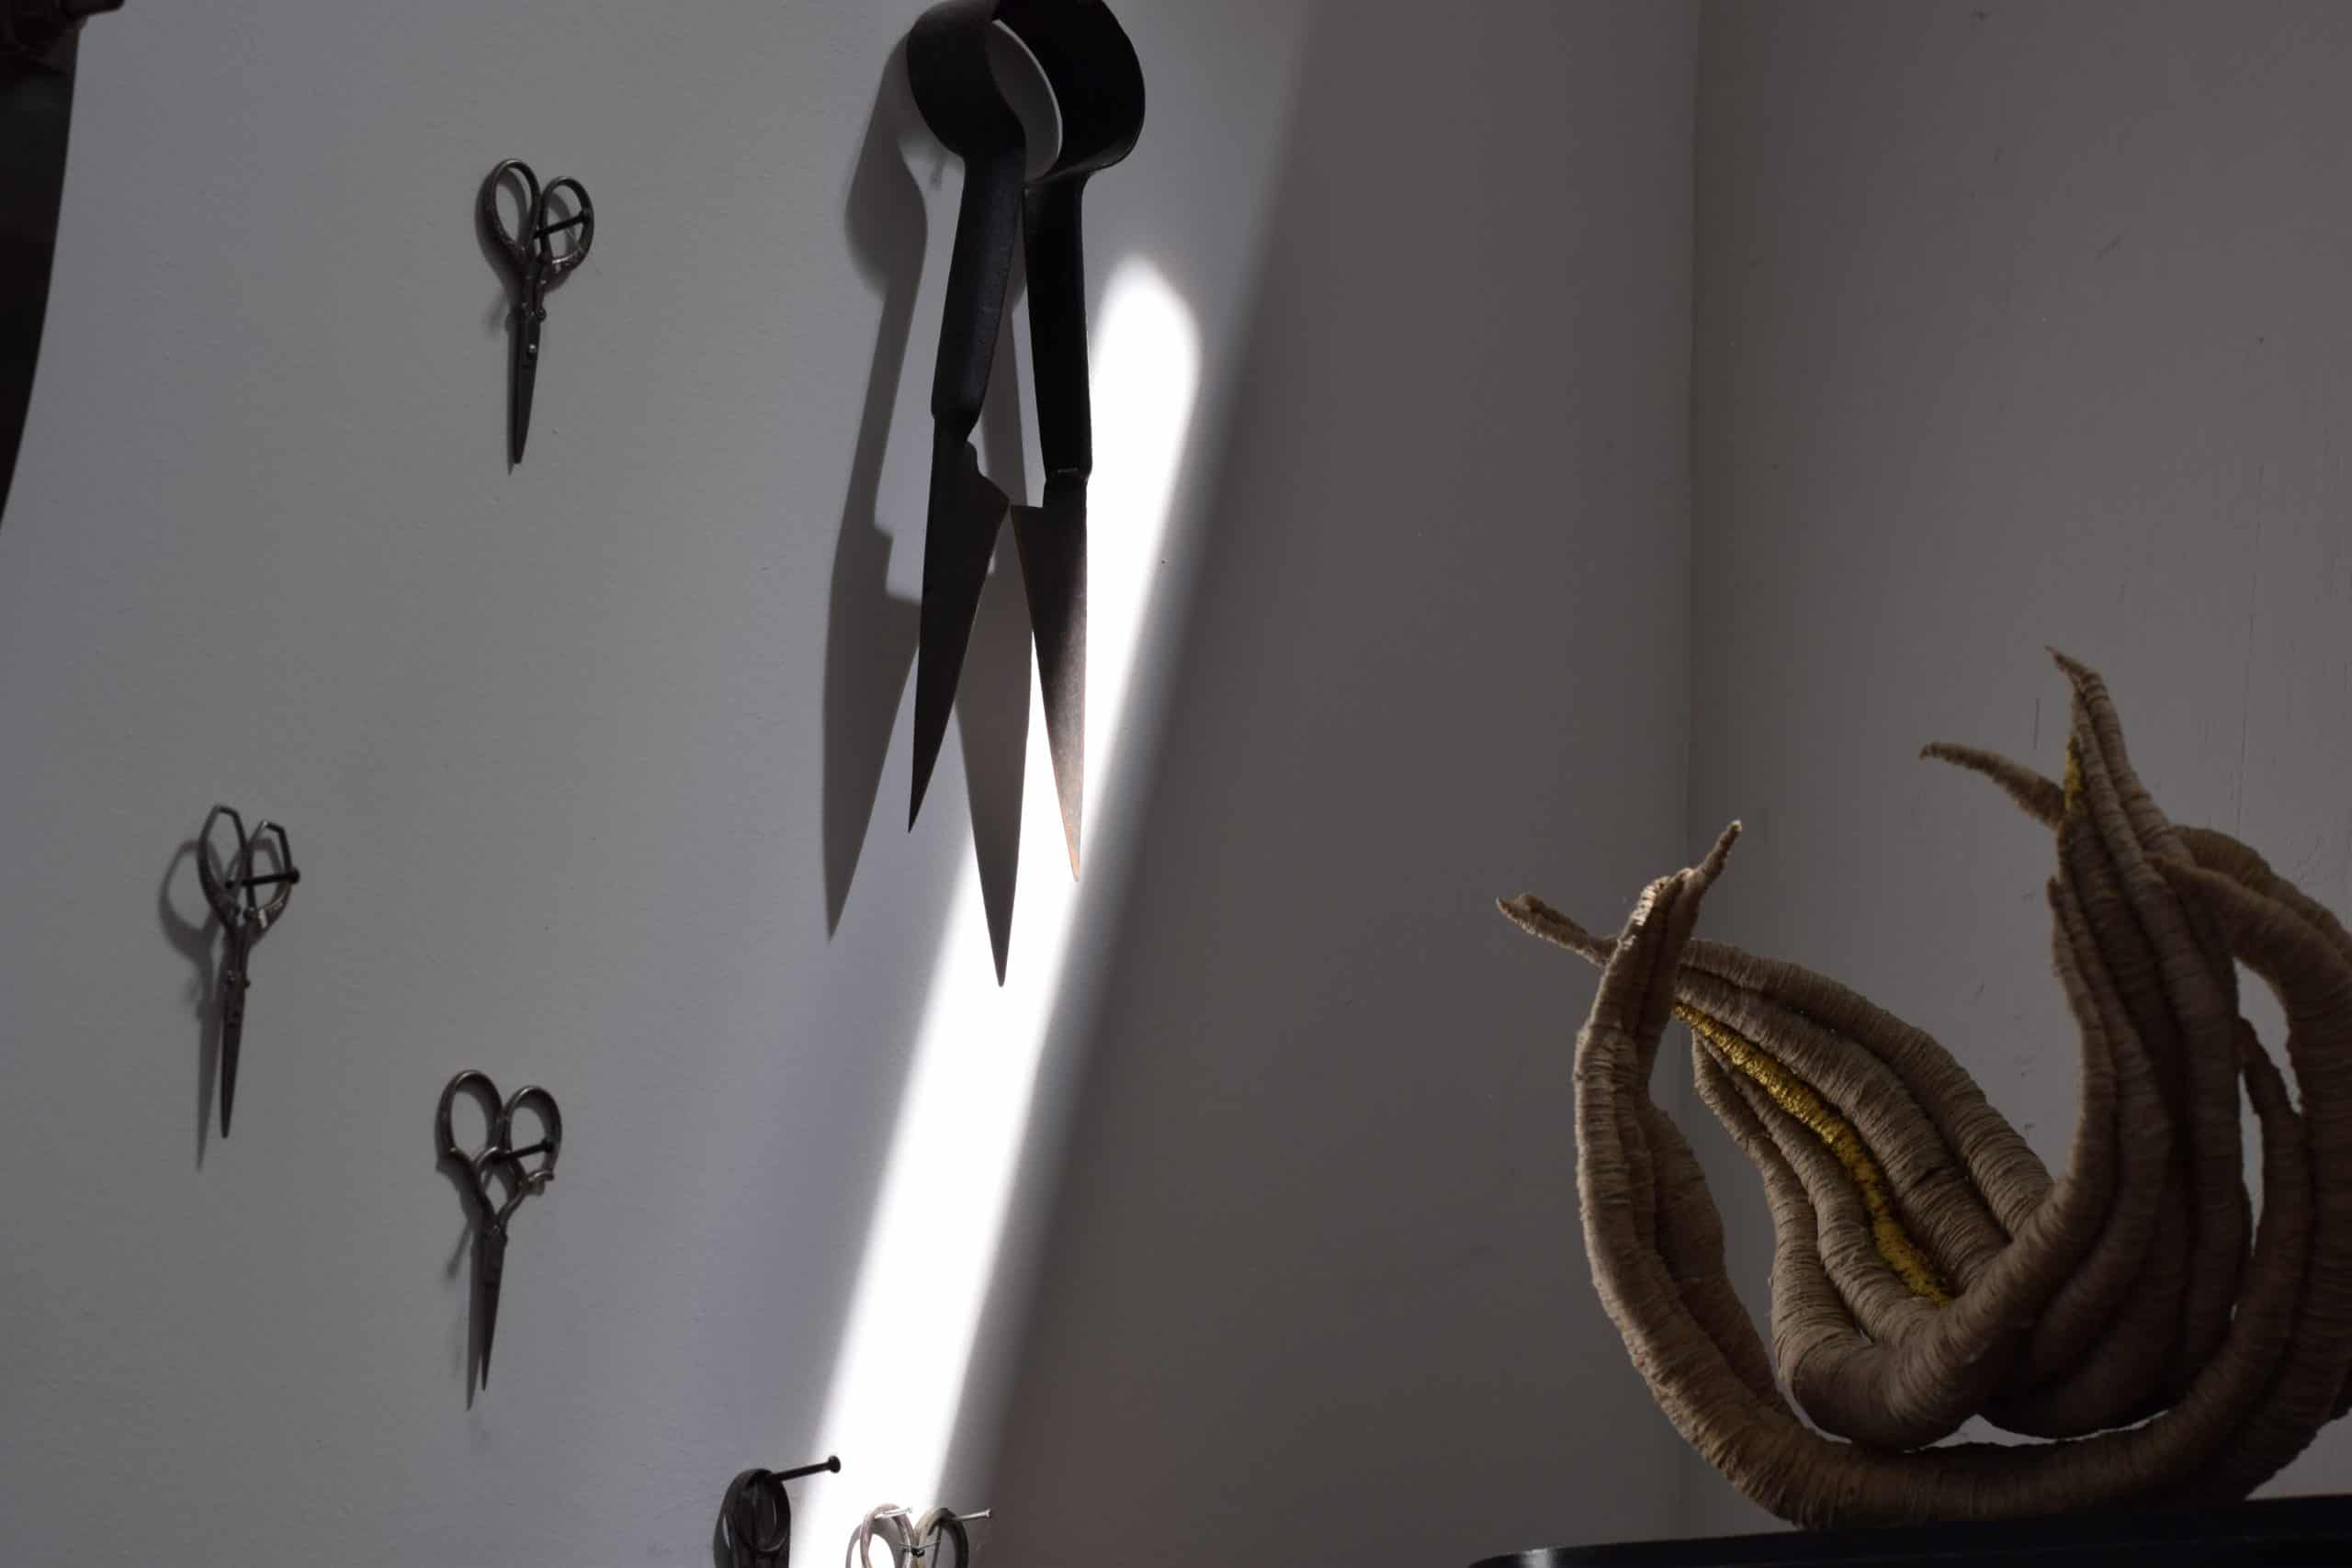 undyed and gold sculpture by Aude Franjou collection of scissors on a wall